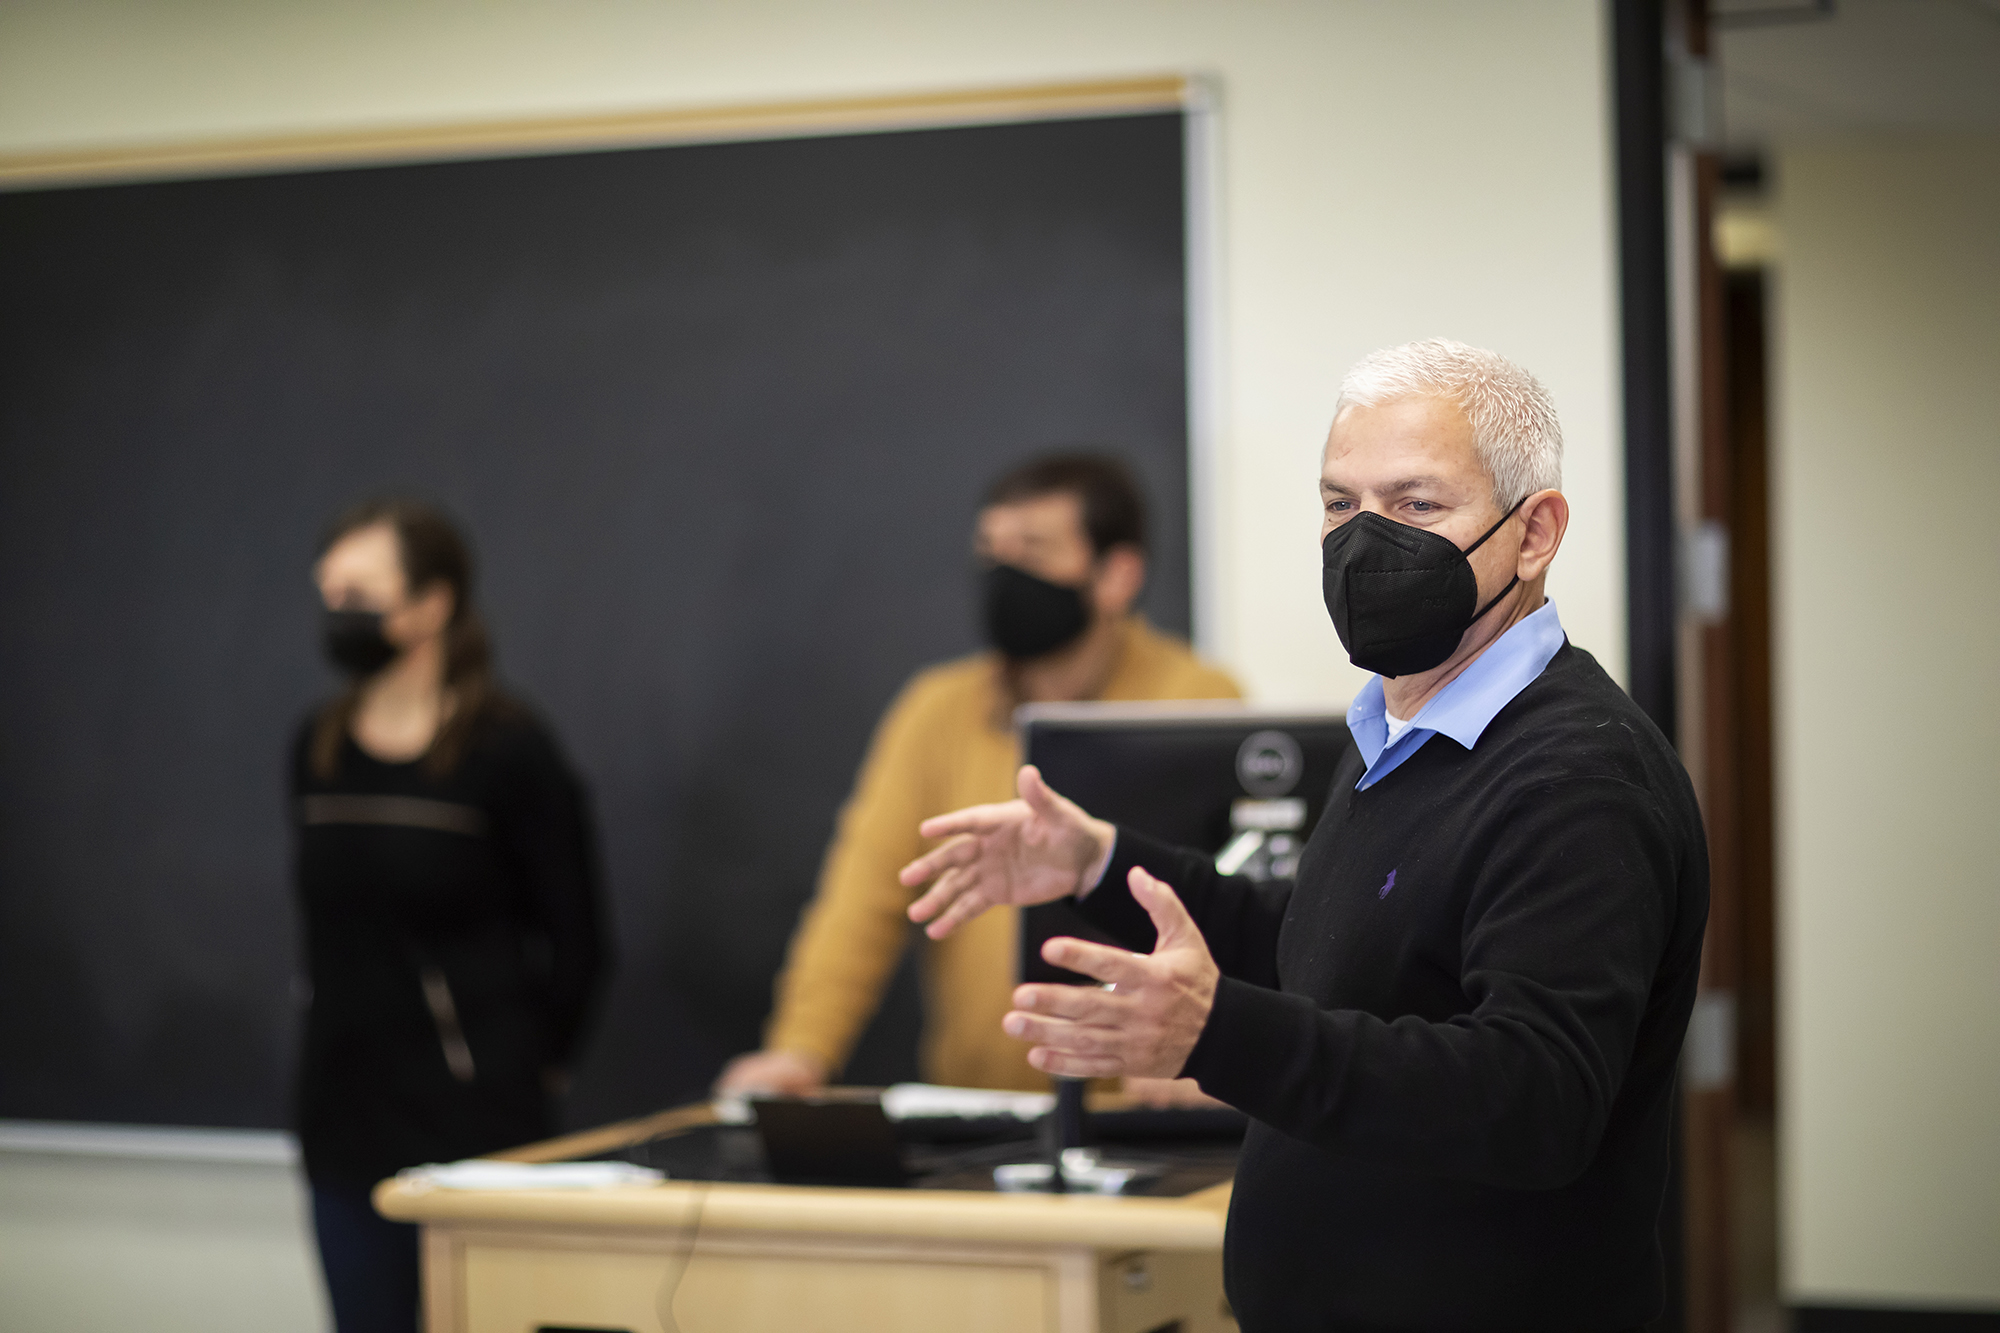 Emilio Parrado in a classroom gesturing as he speaks to the class. Two people are blurred behind in the background.